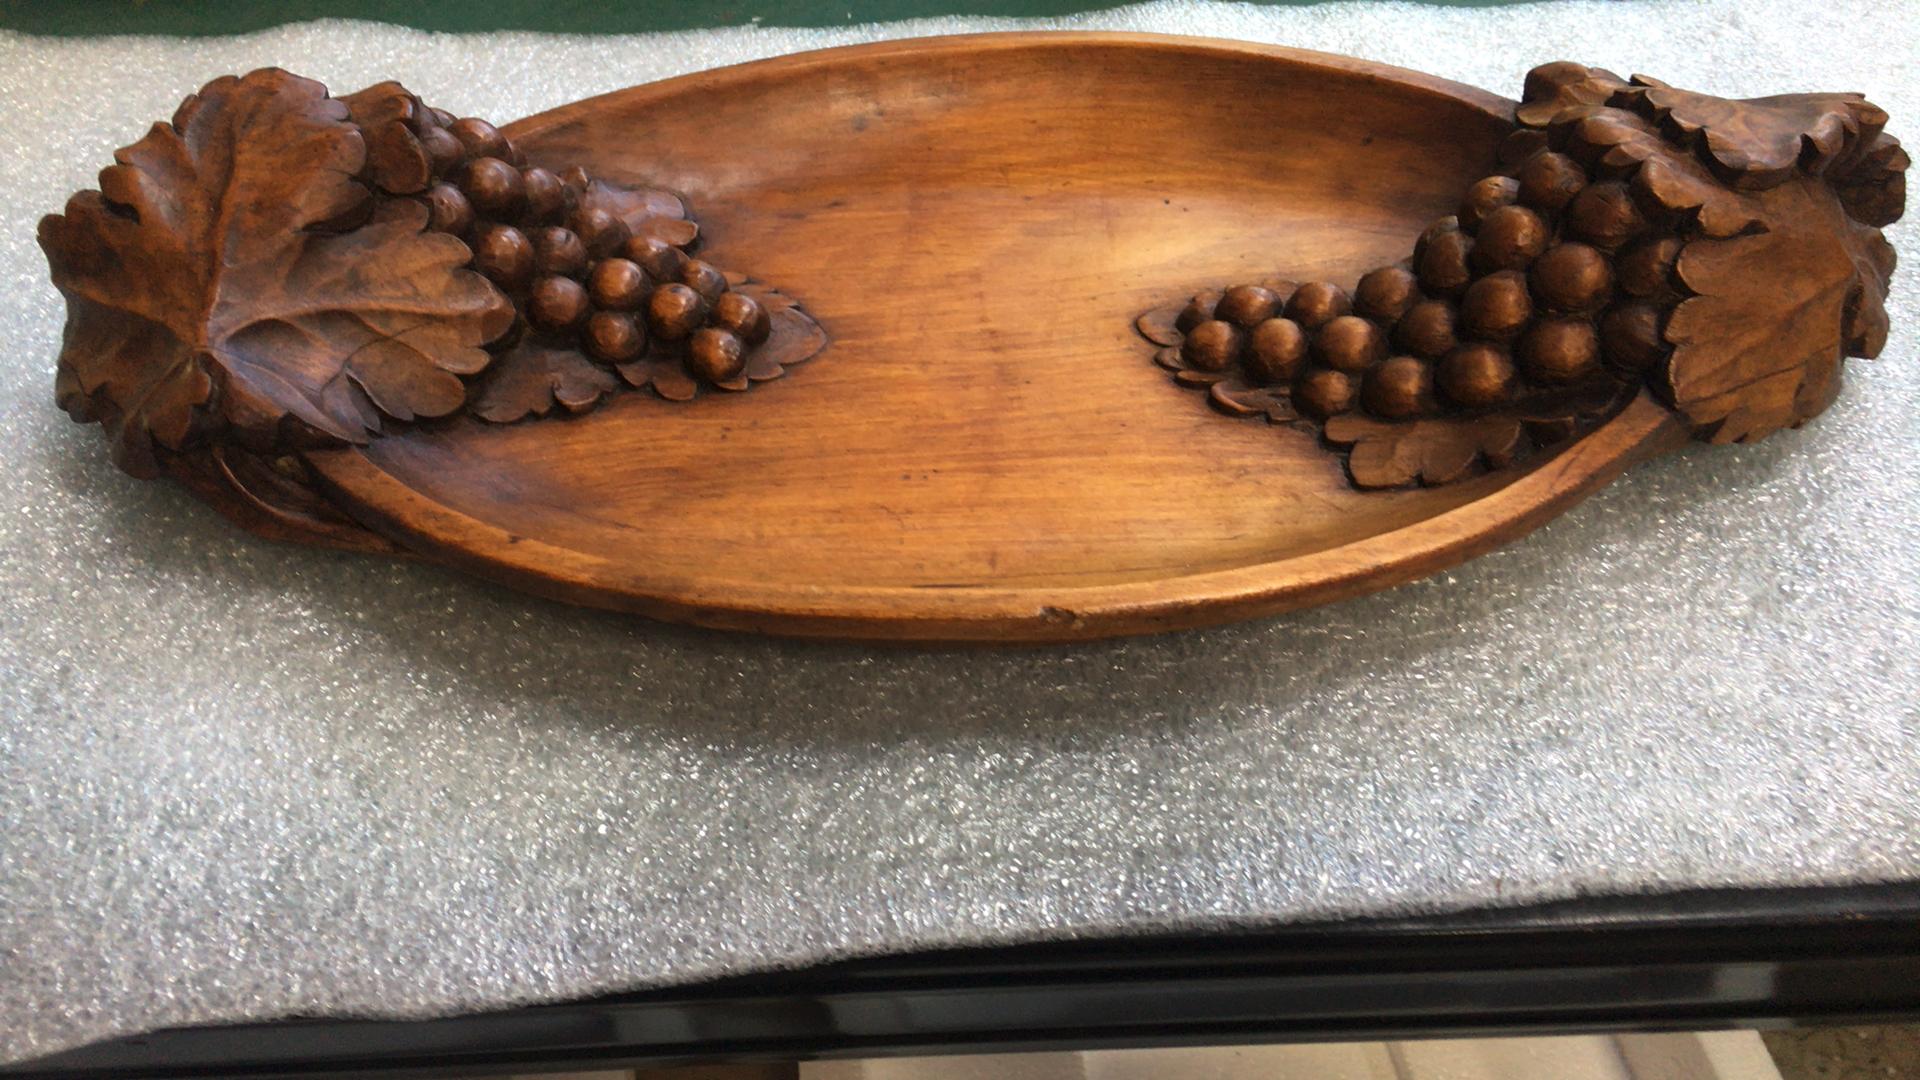 Country French Carved Wood Platter with Grapes and Vine Leaves, circa 1900